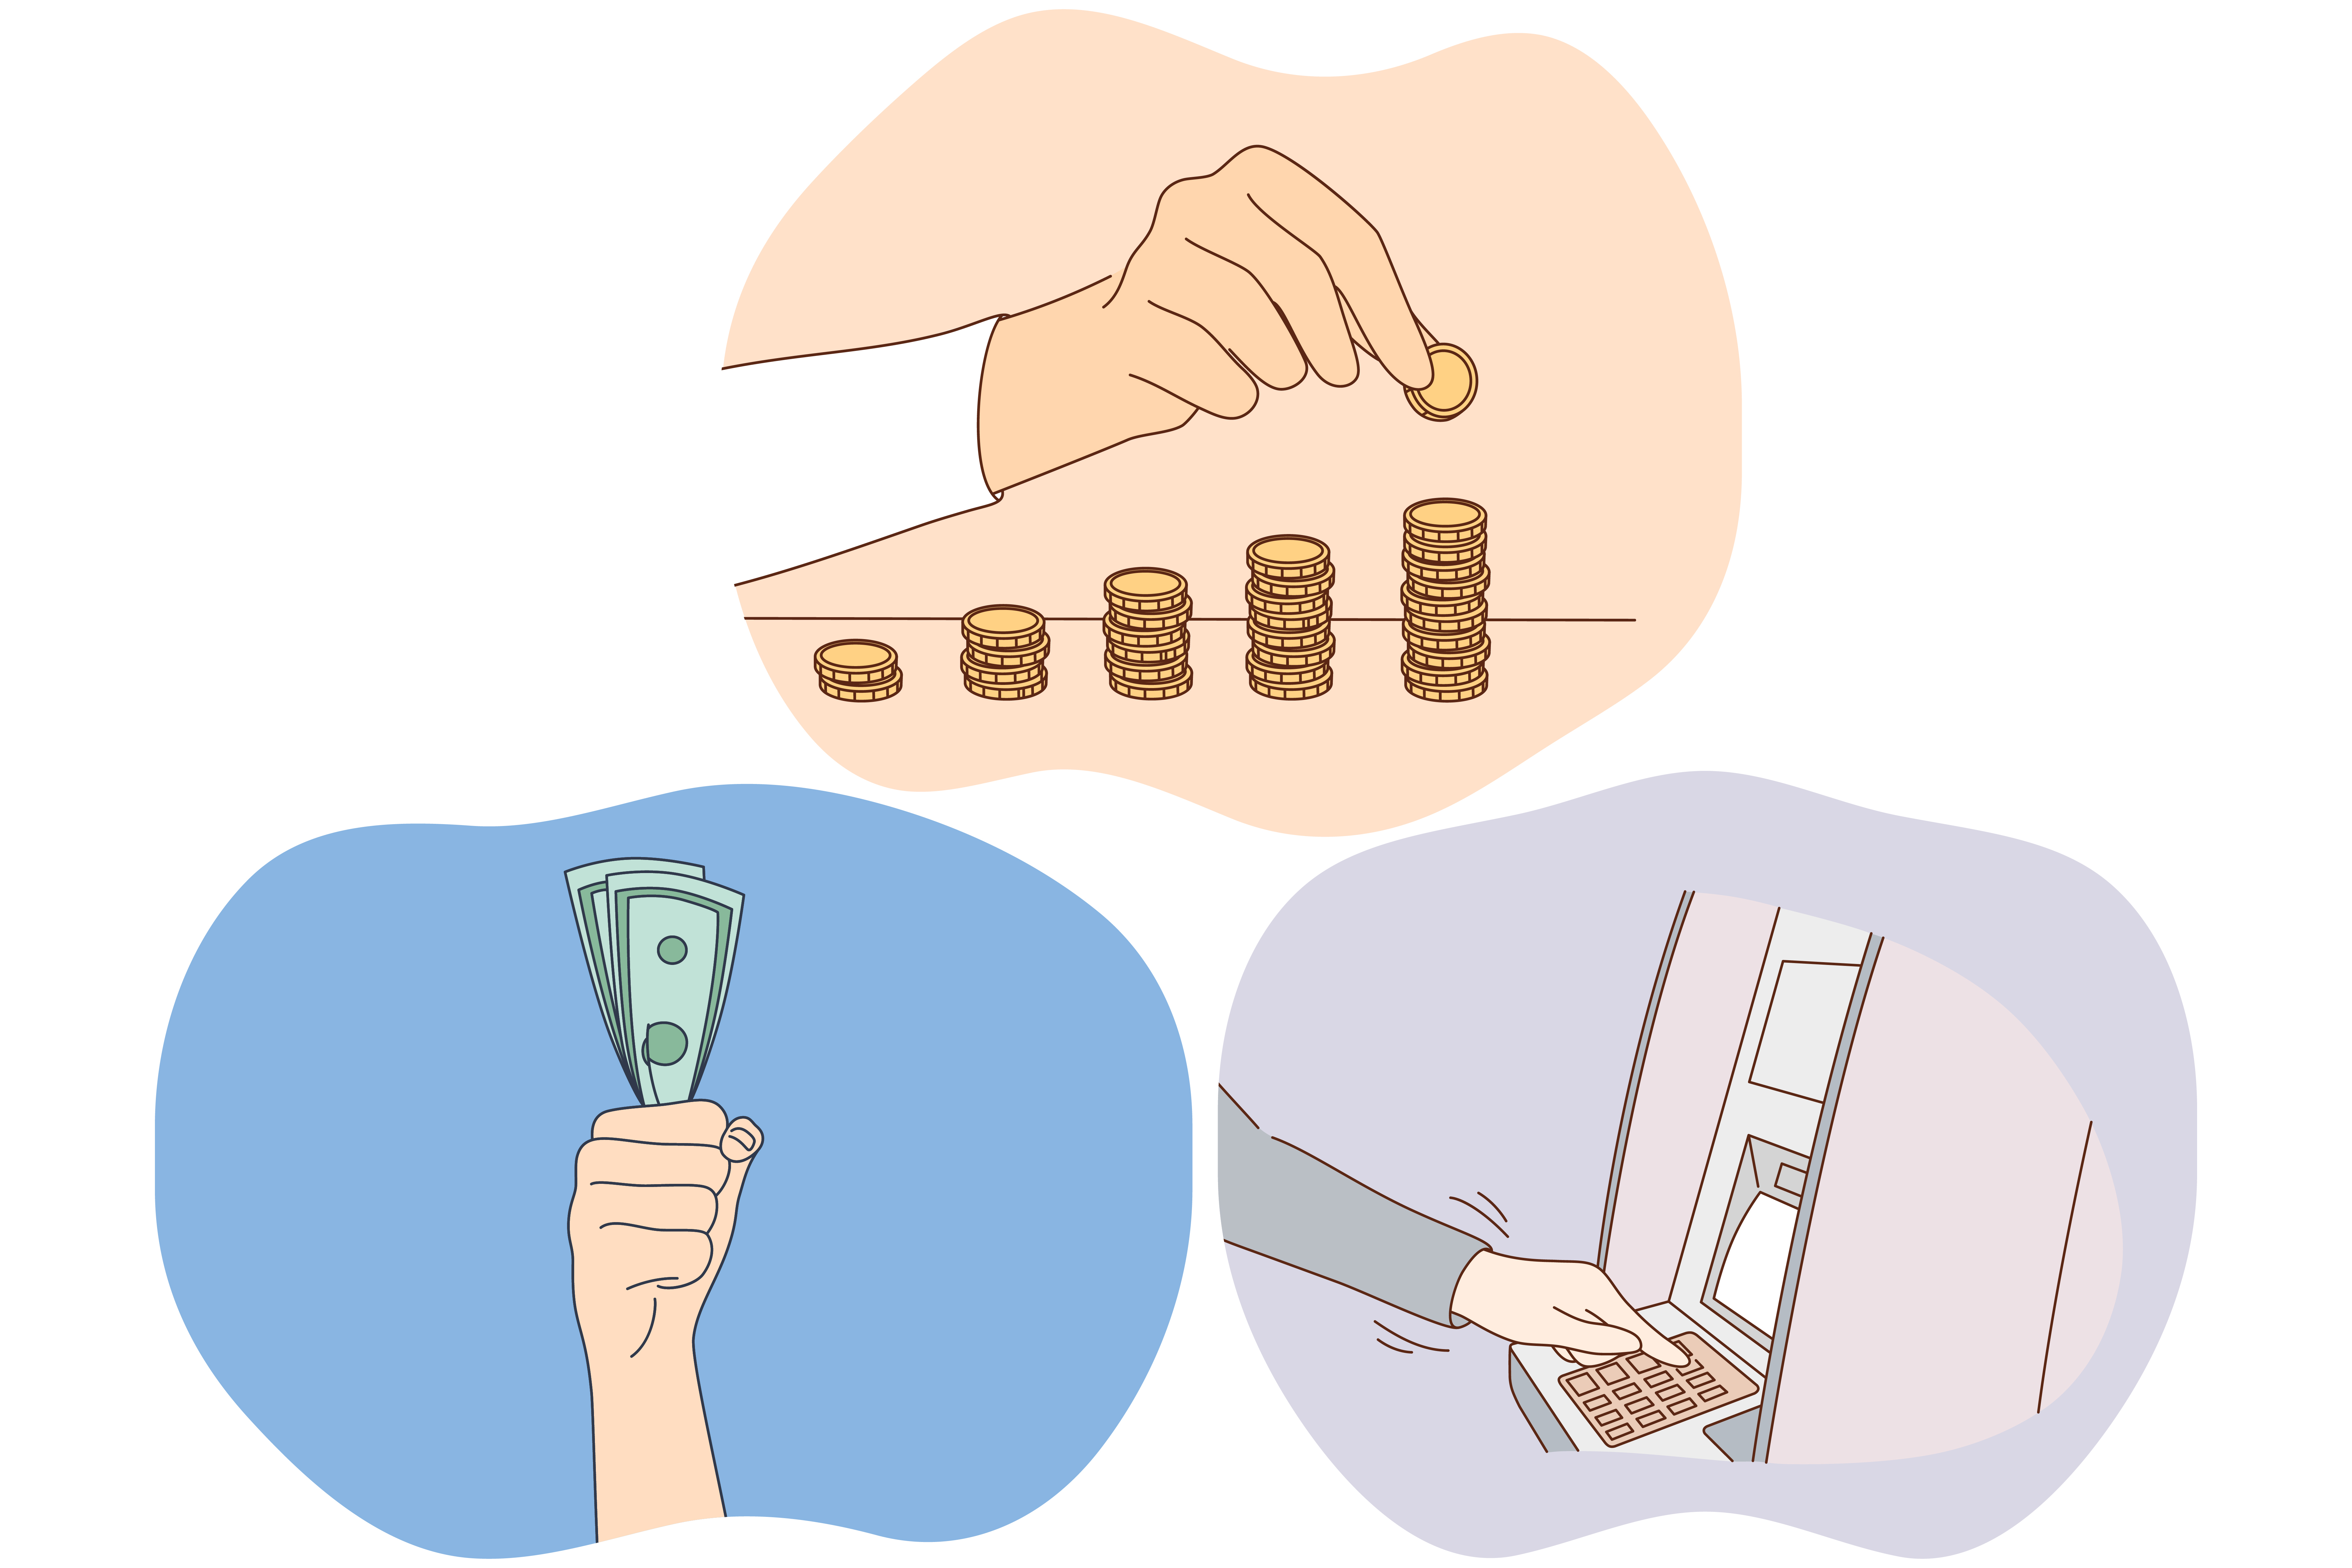 Money savings, earning financial wealth concept. Hands of people making stacks of golden coins, holding heap of cash, making withdrawal on atm machine. Finance, payment, credit, investing illustration. Money savings, earning financial wealth concept